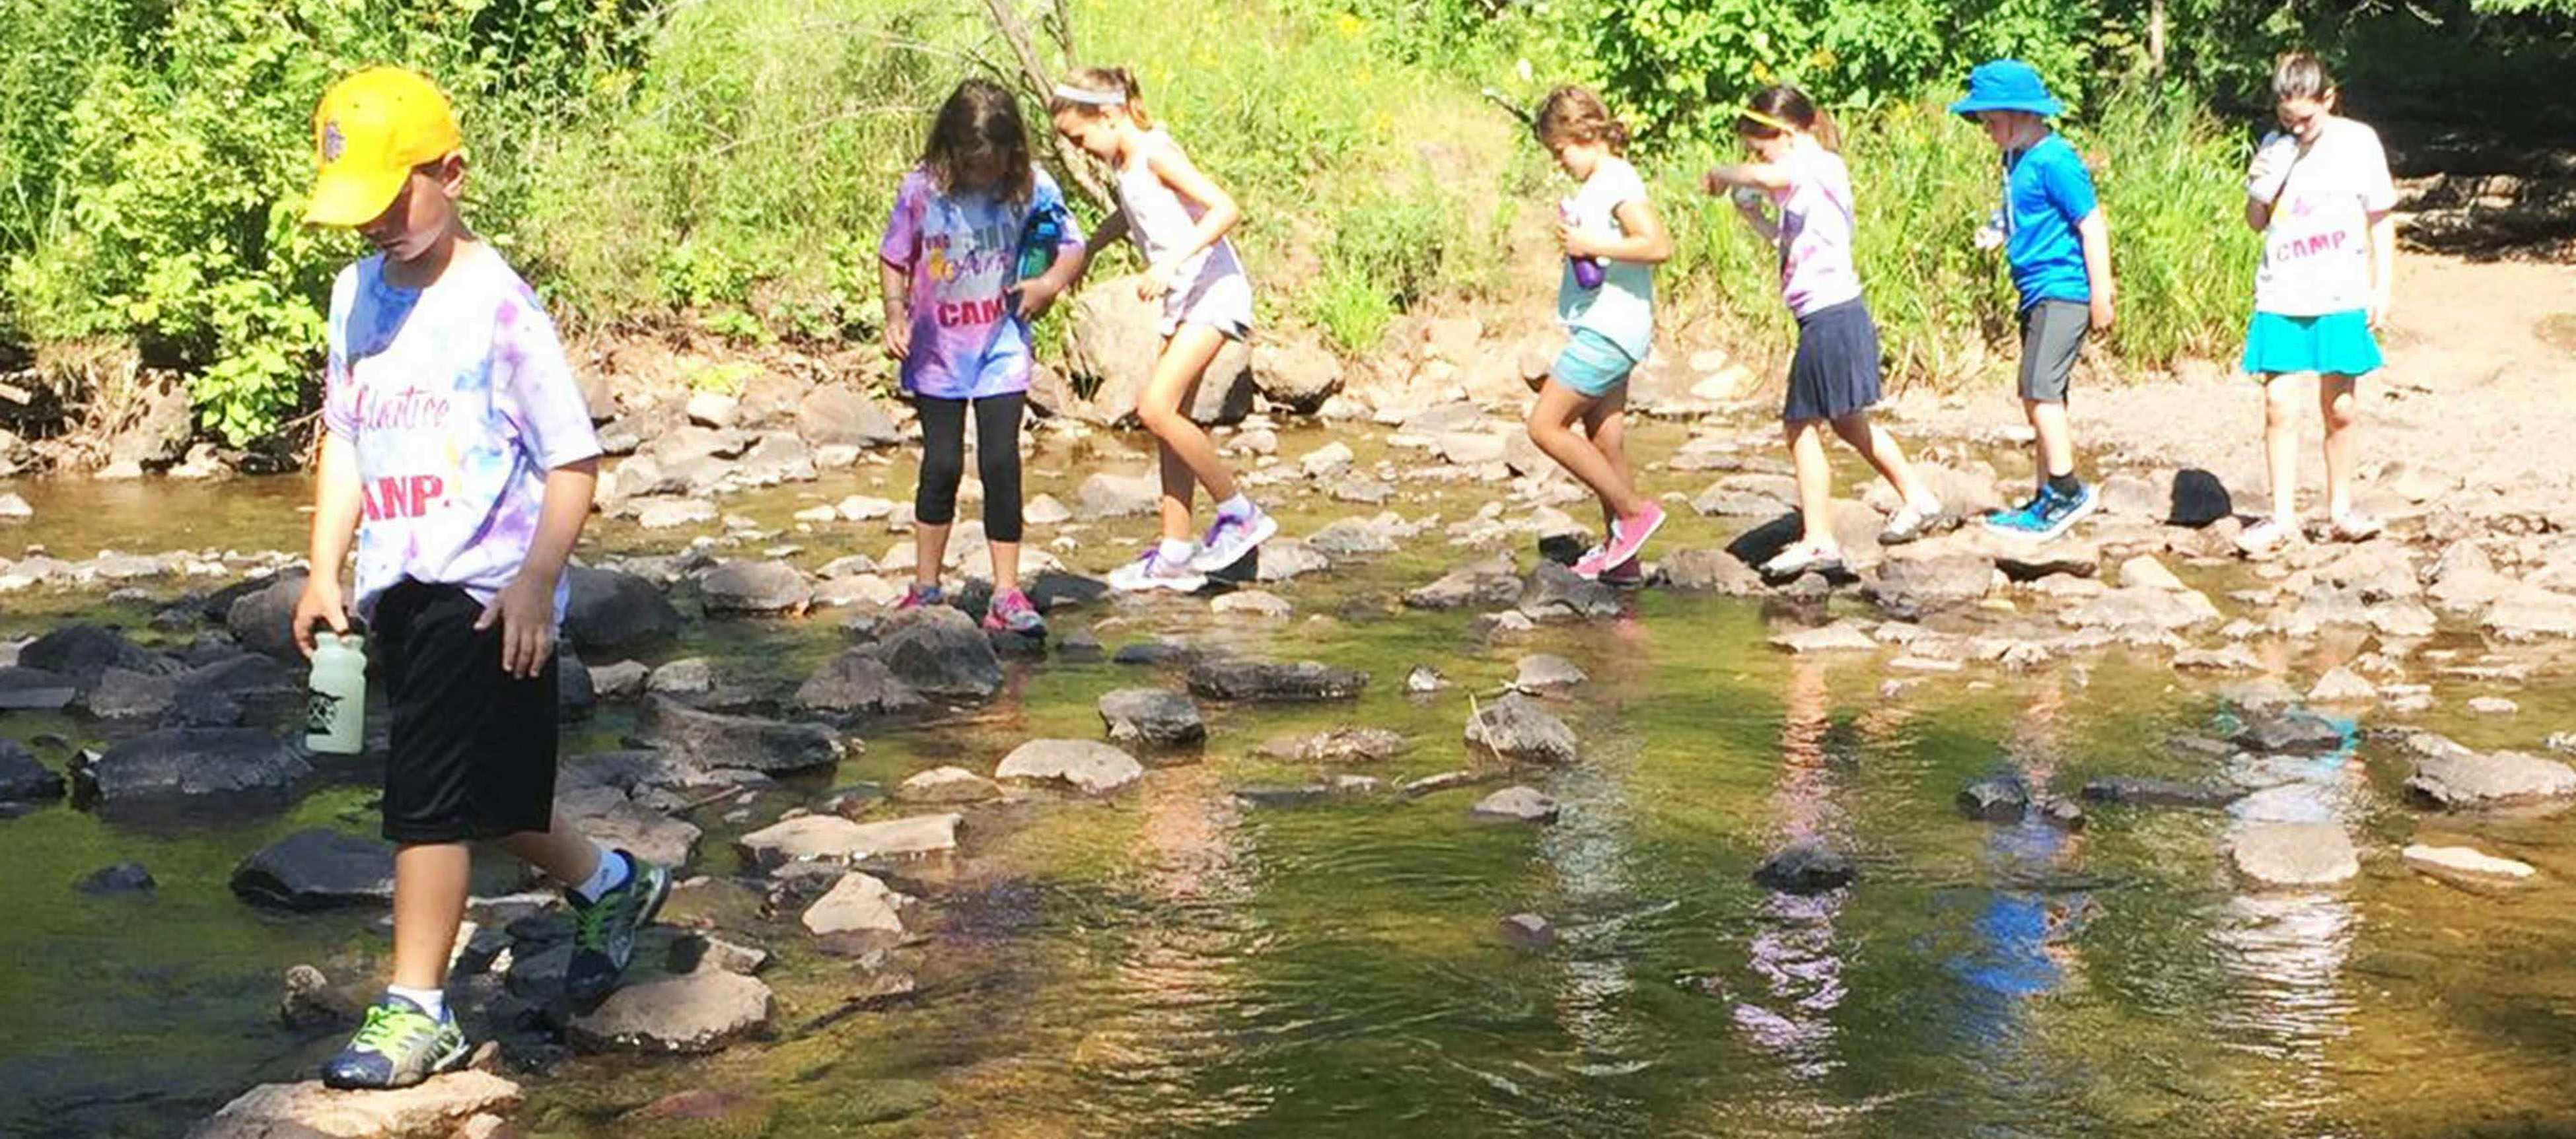 kids wading in a river